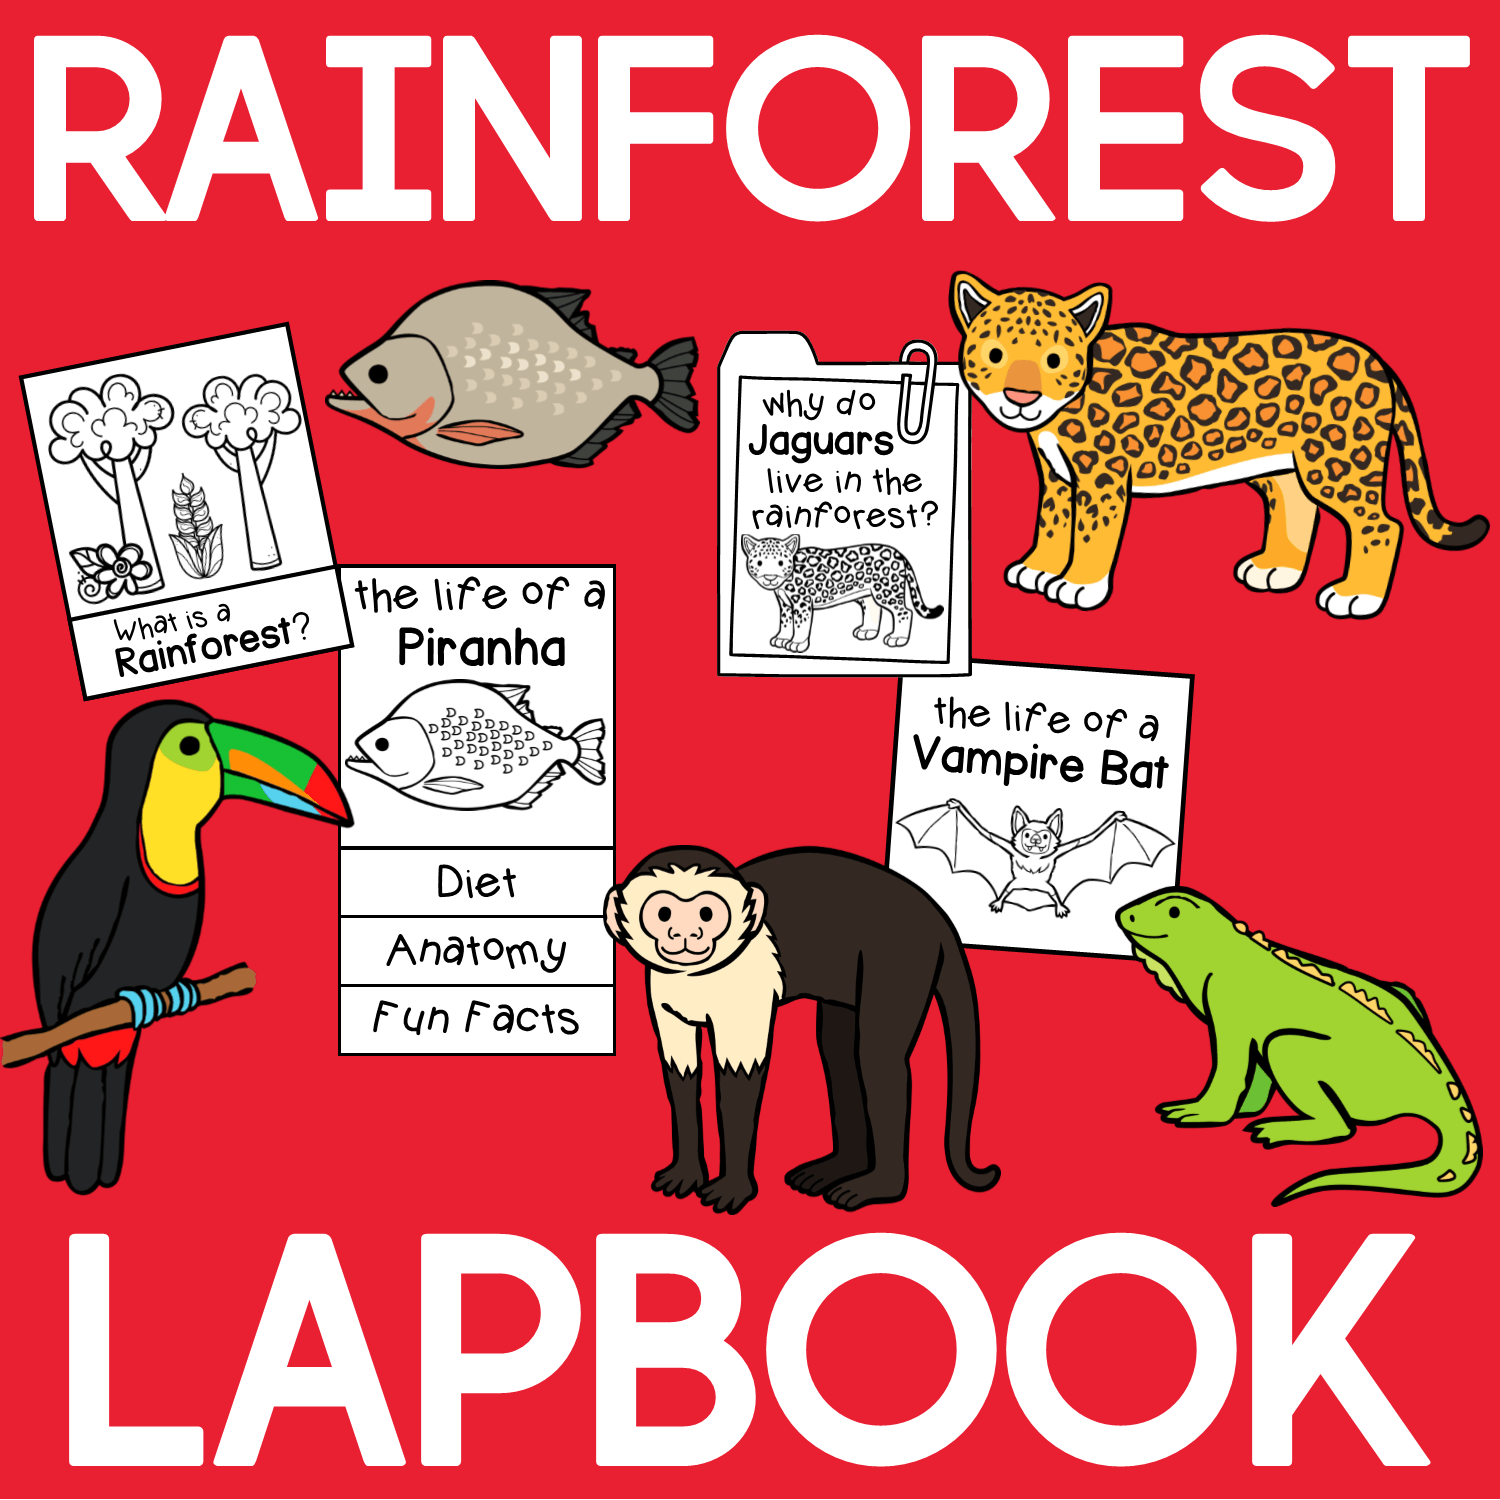 rainforest animals pictures and facts